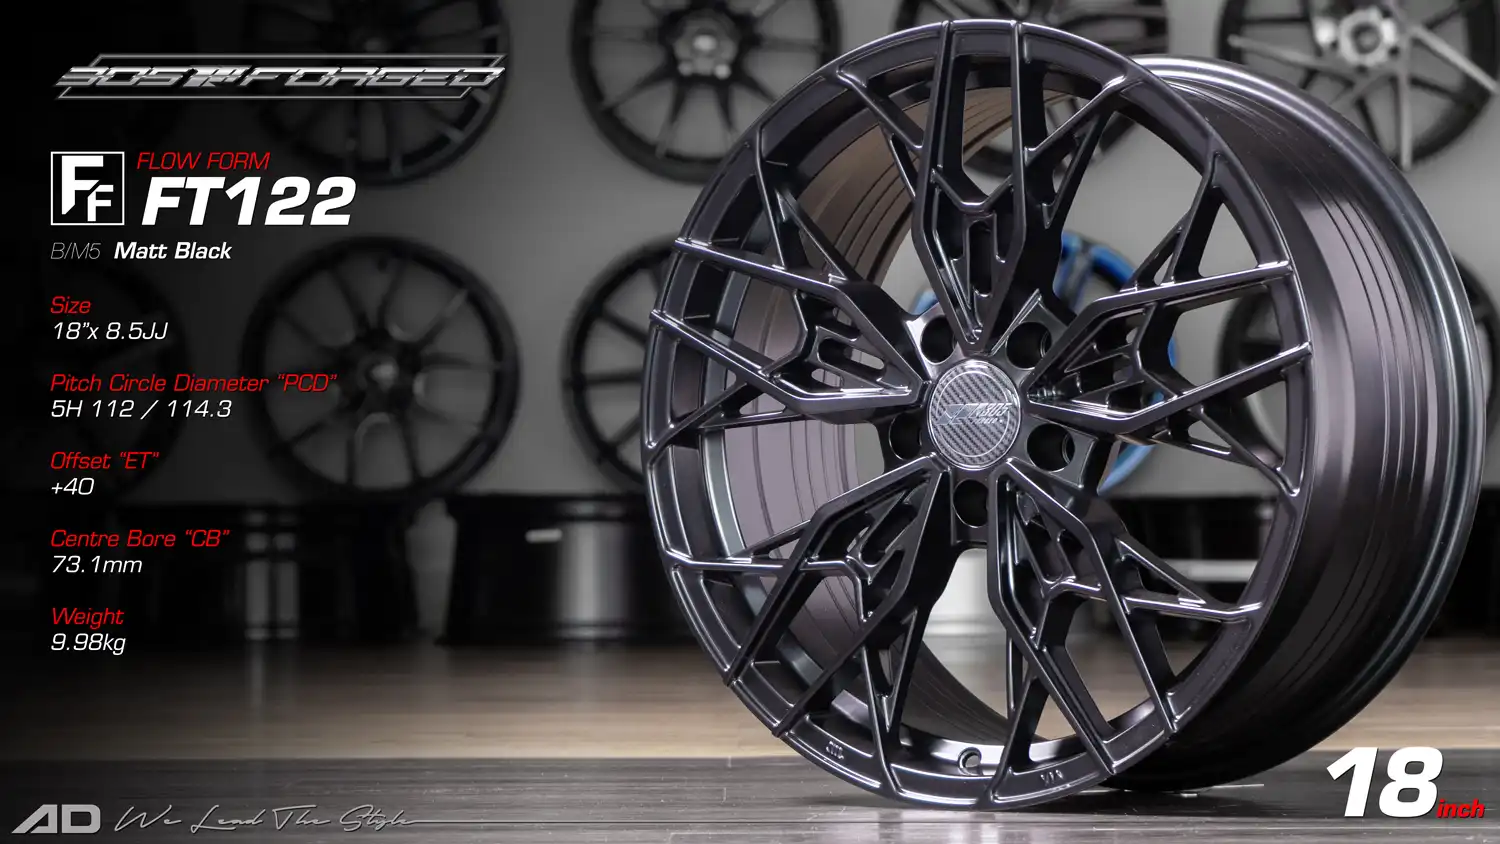 Ad wheels | Bos Forged 122 18 inch 5H112/114.3